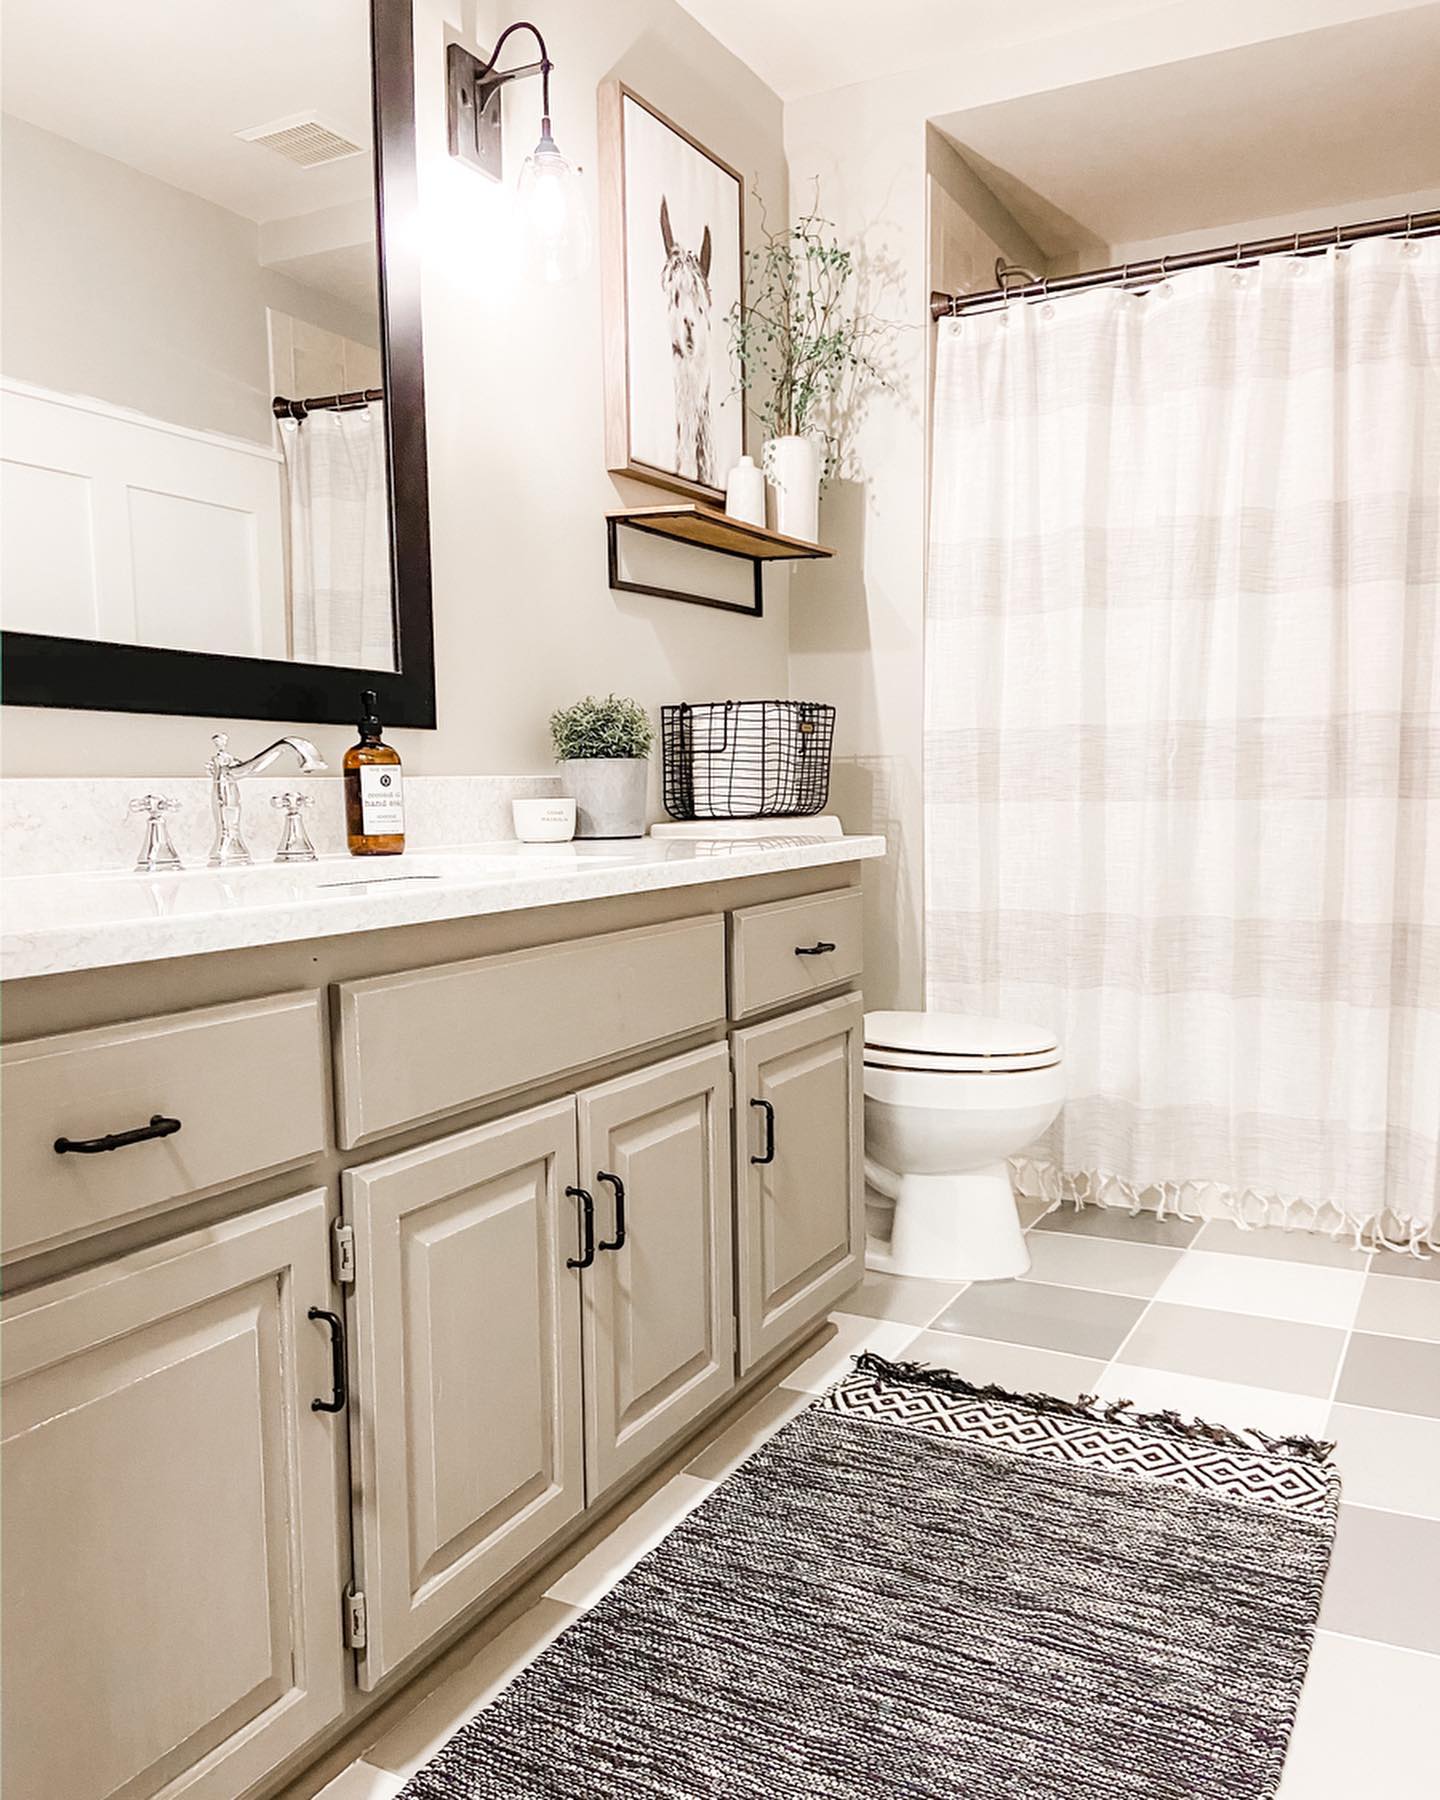 Basement bathroom with a shower, tile flooring, and neutral colors. Photo by instagram user @making_highview_home.